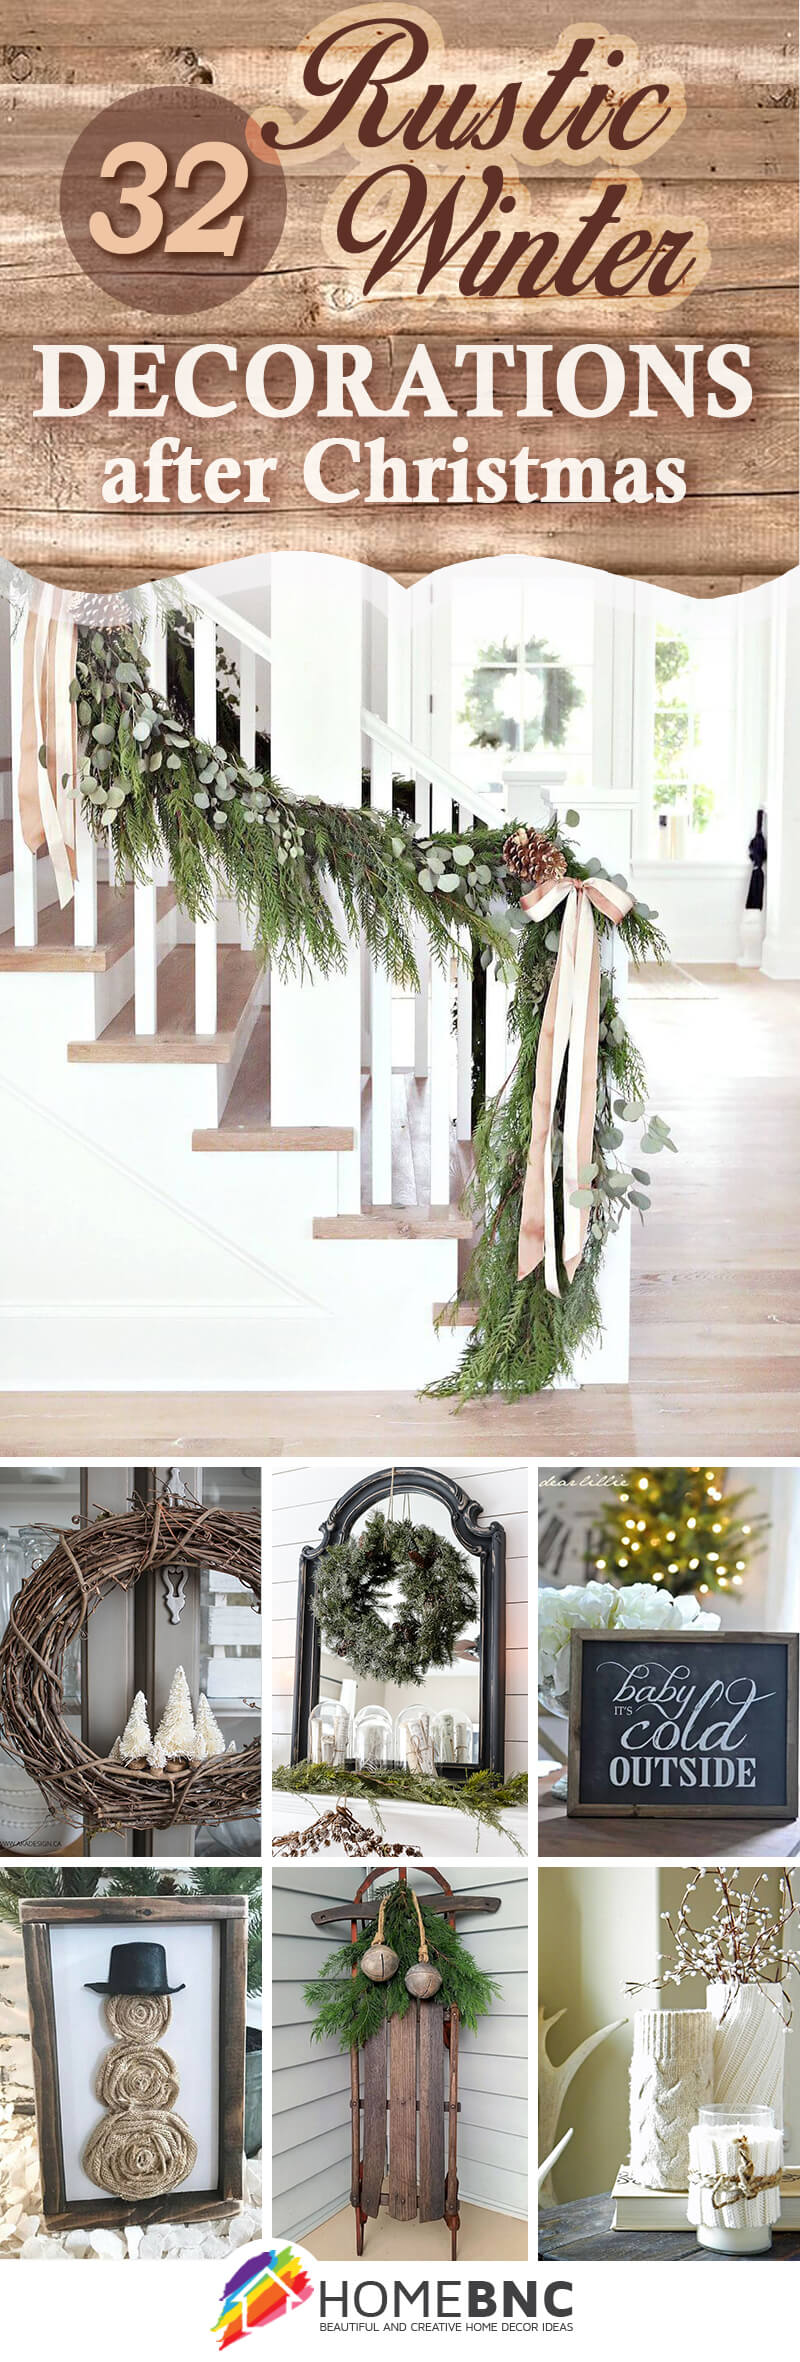 Rustic Winter Decor Ideas after Christmas